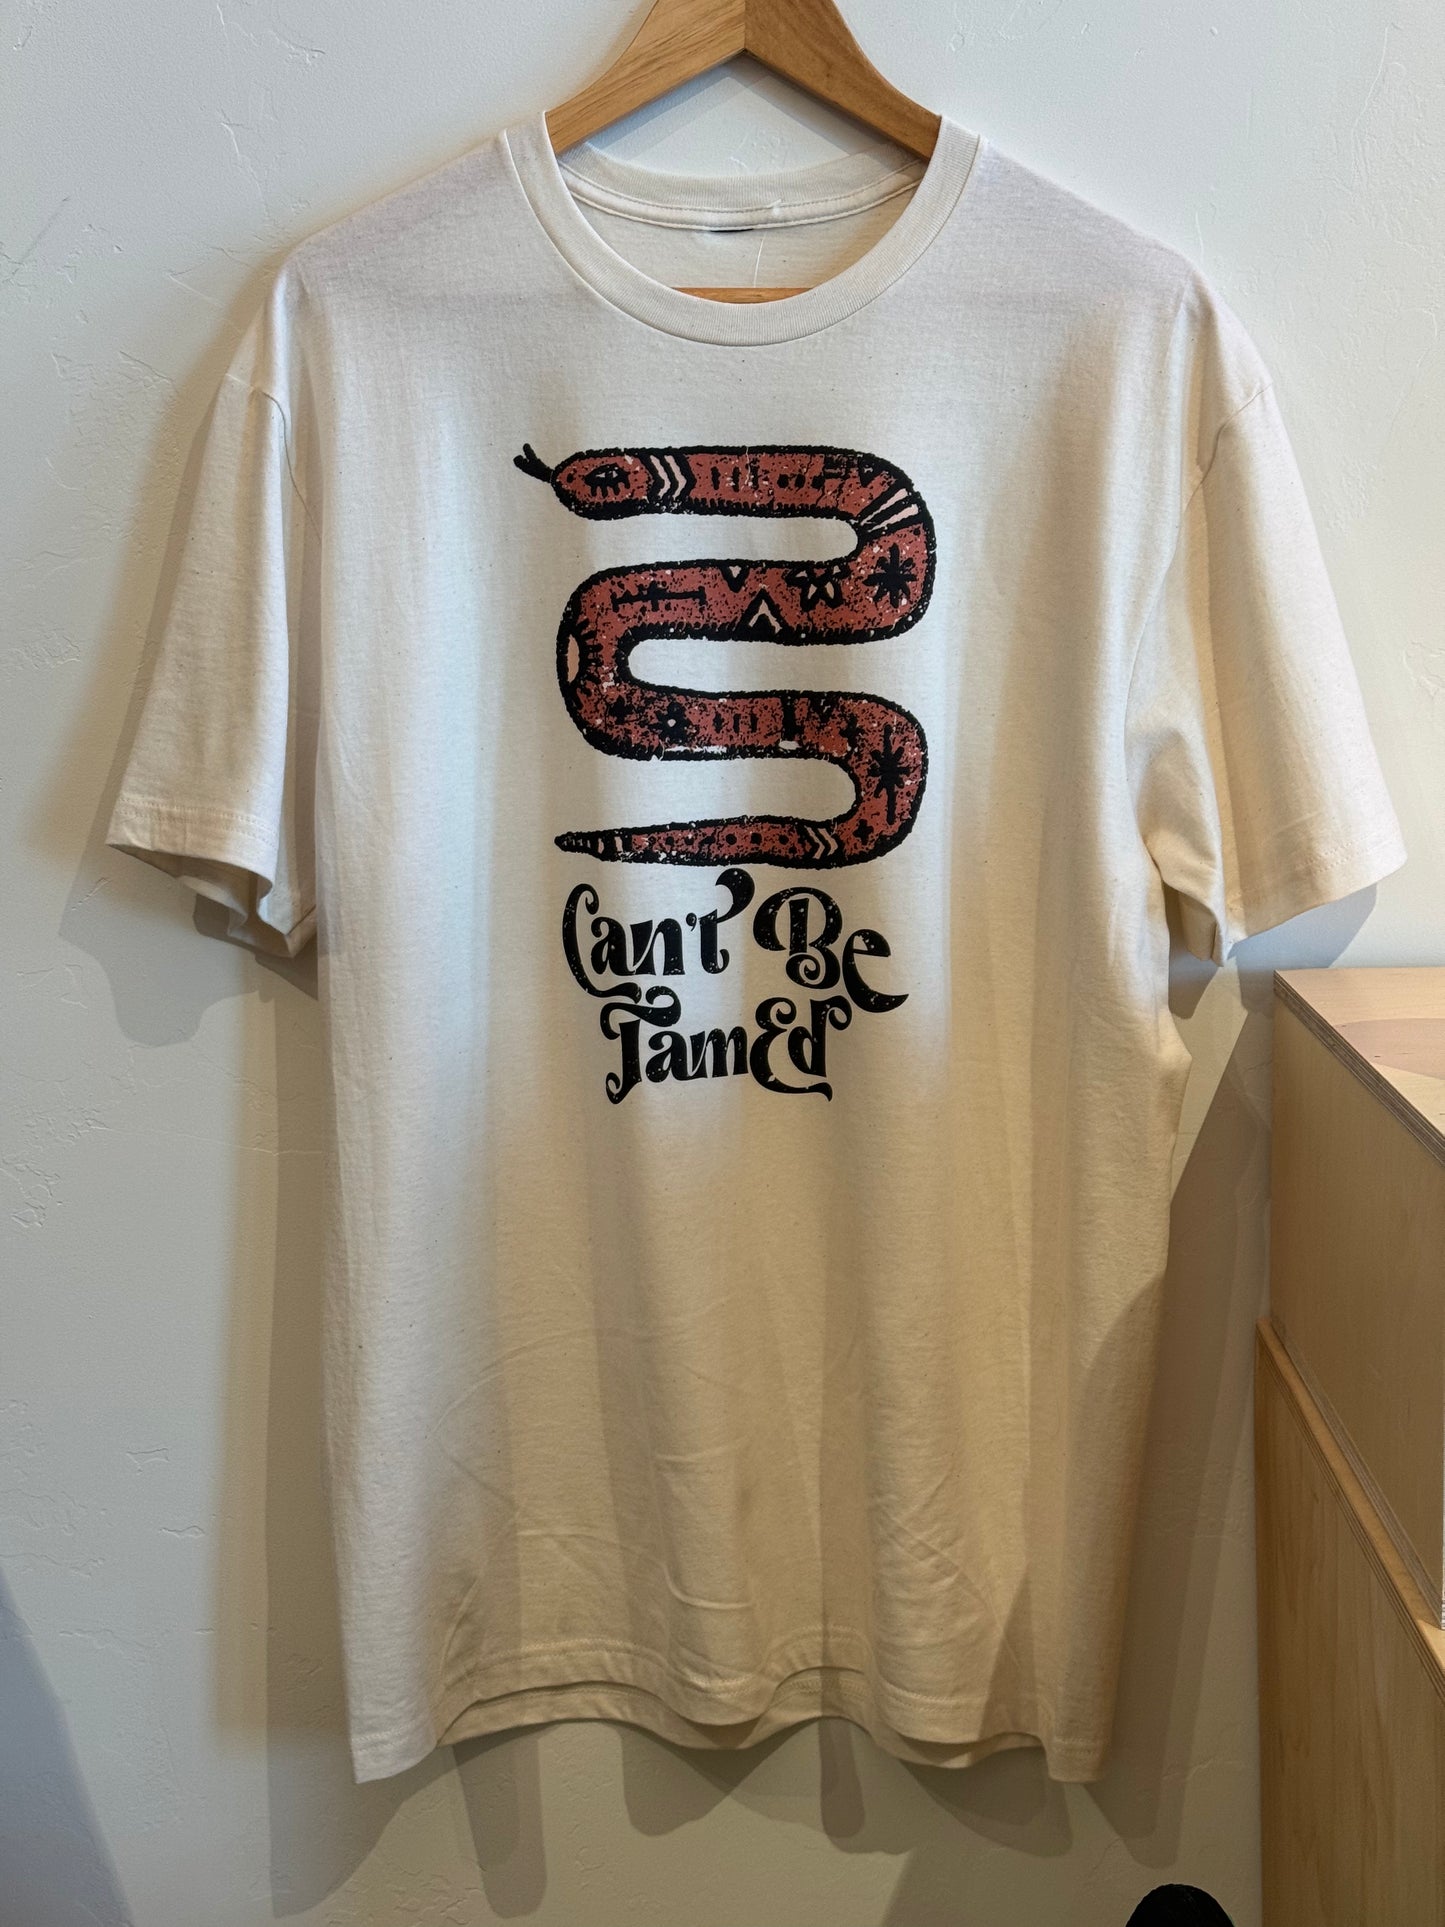 Can't Be Tamed Tee